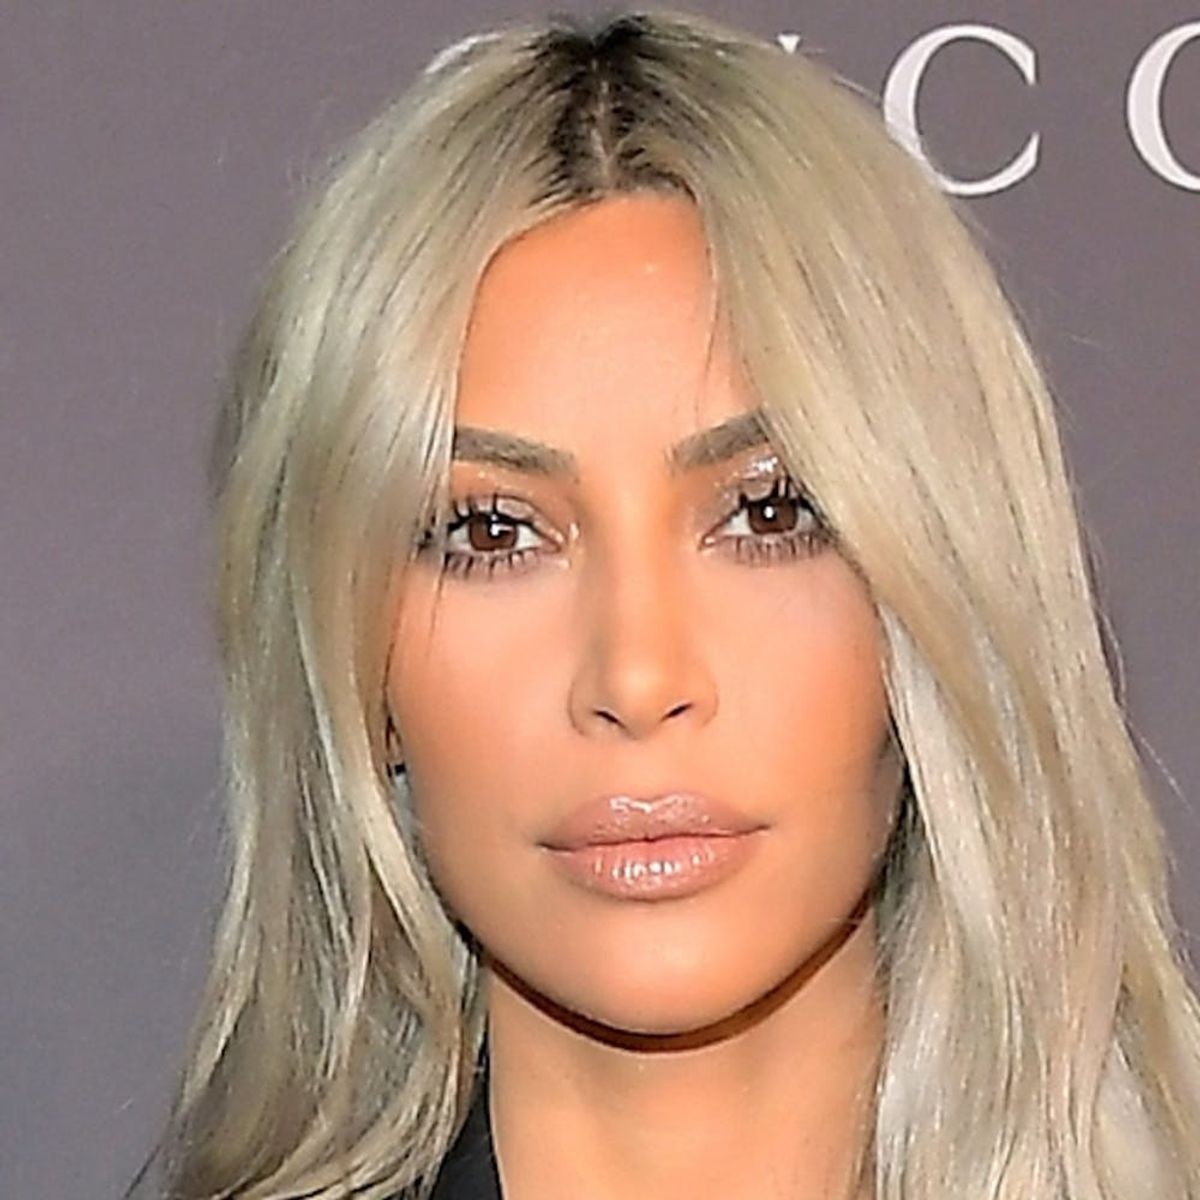 Kim Kardashian’s Hairstylist Says These Are the Trendiest Hair Colors for Summer 2018